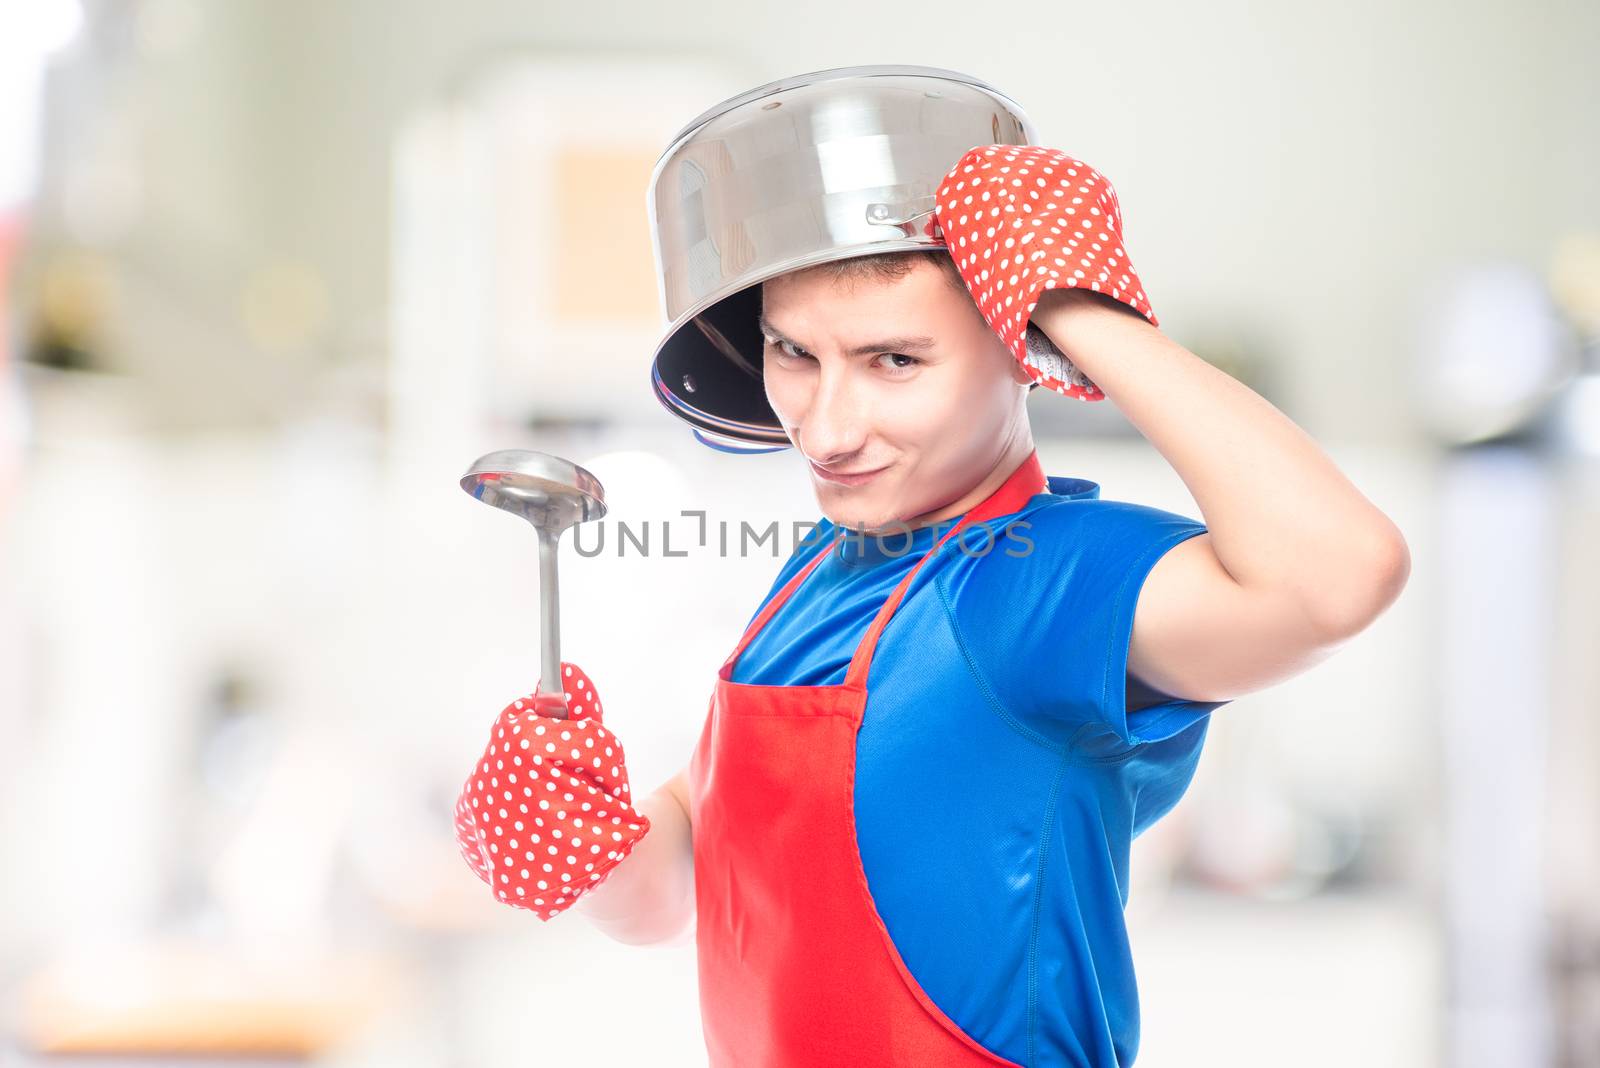 crazy man in an apron with a pan on his head posing in the kitch by kosmsos111